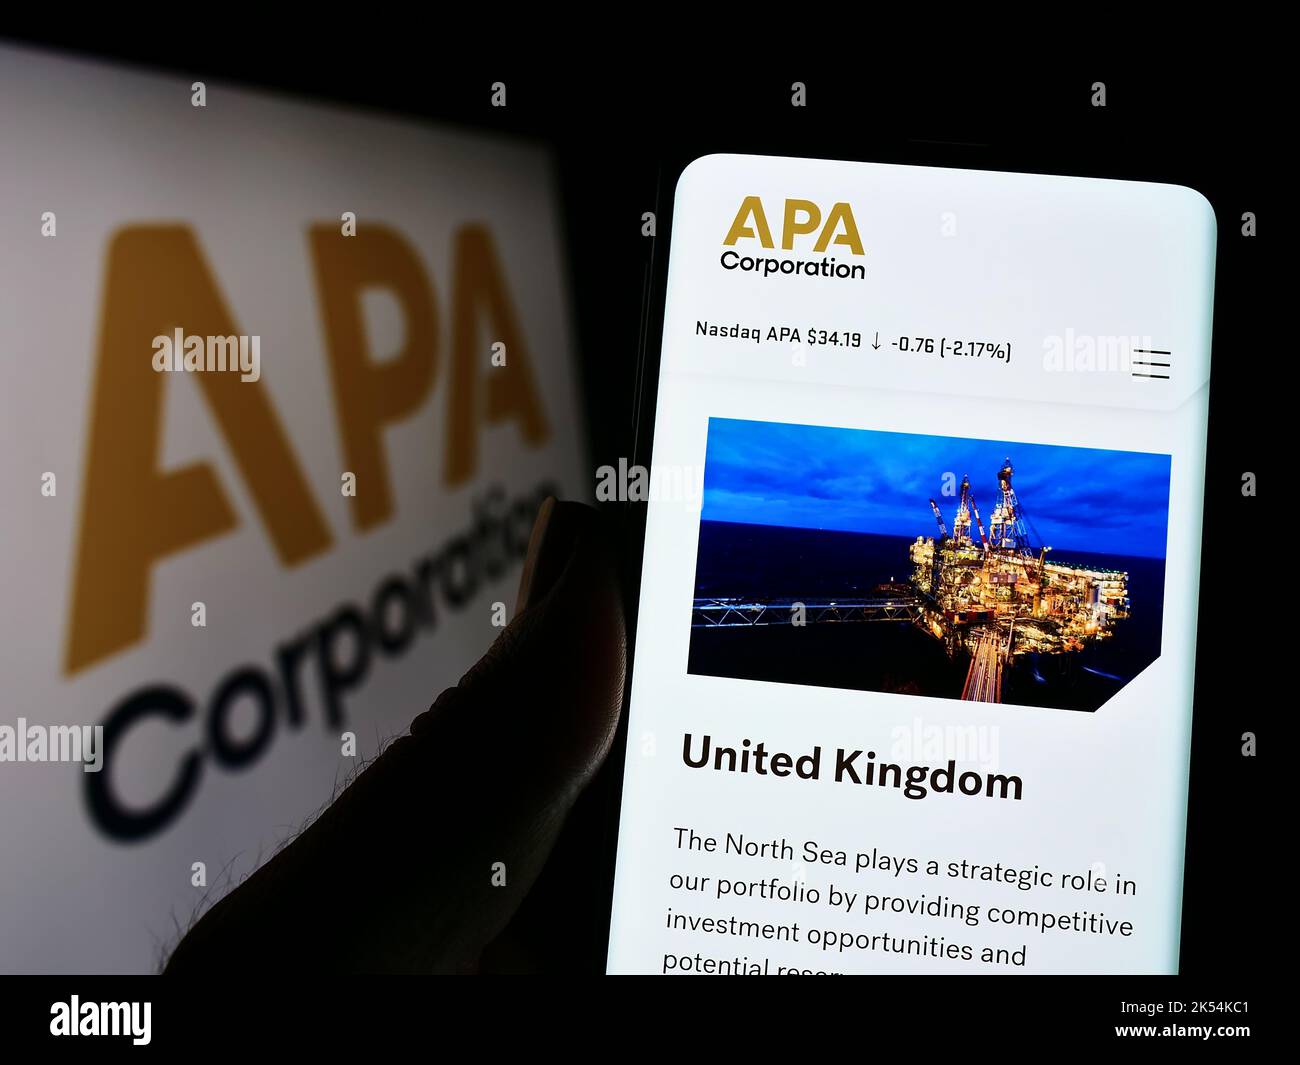 Person holding cellphone with webpage of US petroleum company APA Corporation on screen in front of logo. Focus on center of phone display. Stock Photo